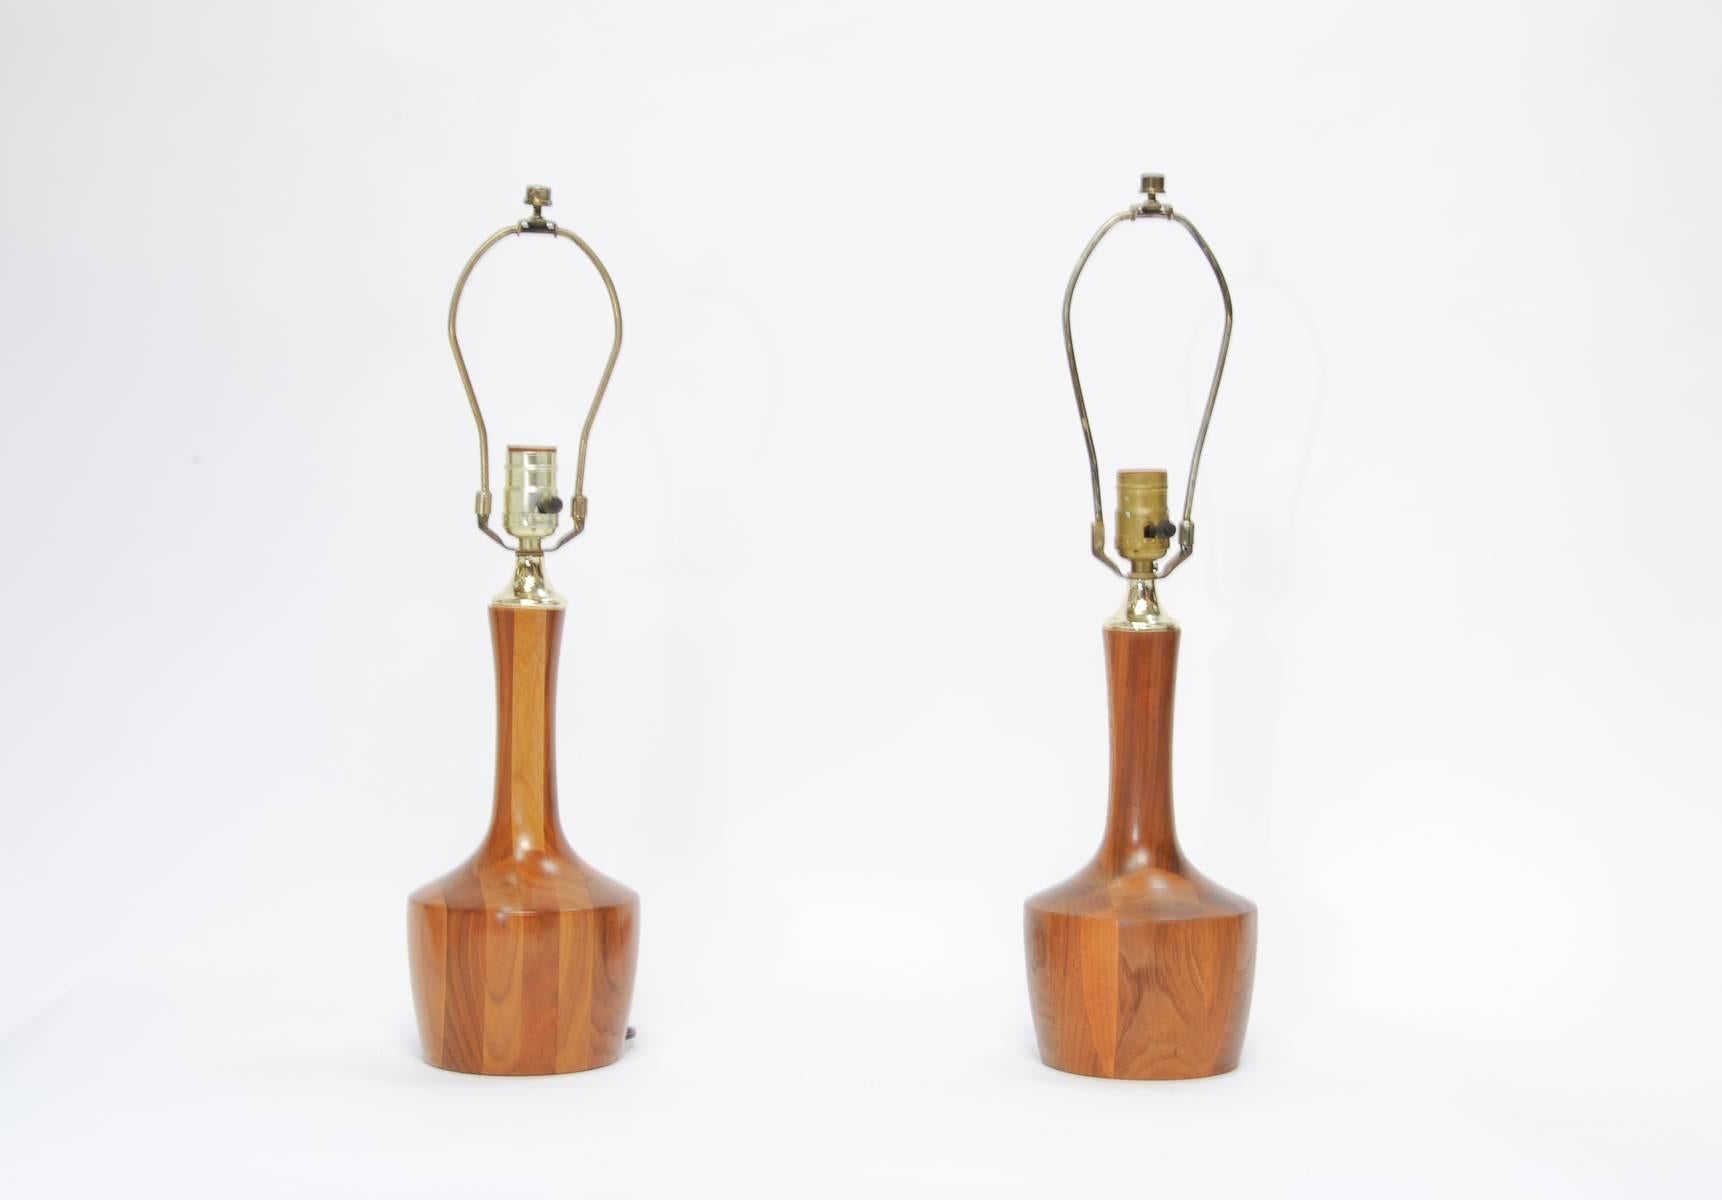 A handsome pair cut butcher block table lamps. These finely detailed table lamps are sculptural and functional for any room.

Sold without shades.